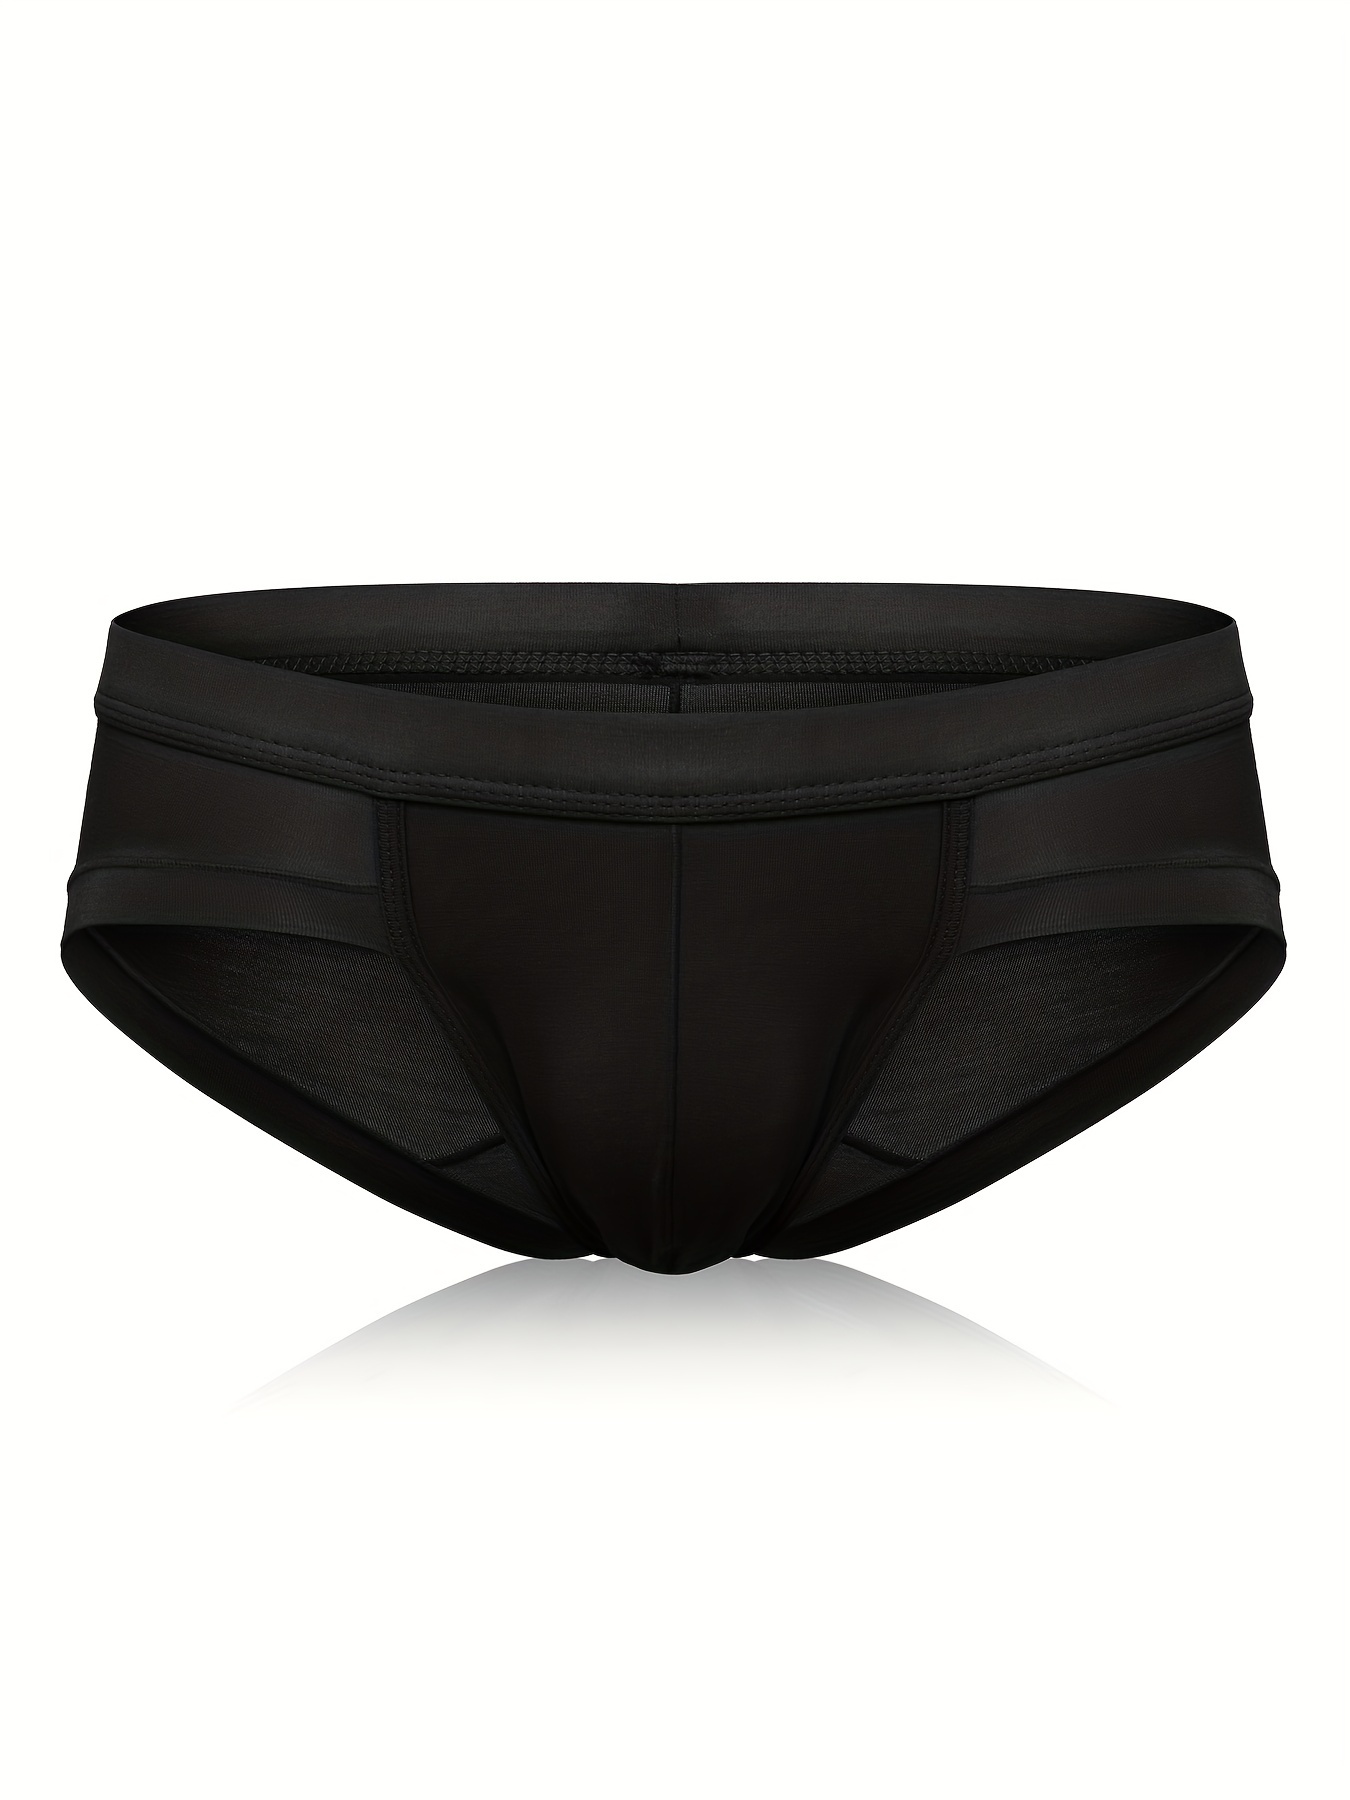 Men Sexy Briefs Low-Waist Comfy Modal Breathable Knickers